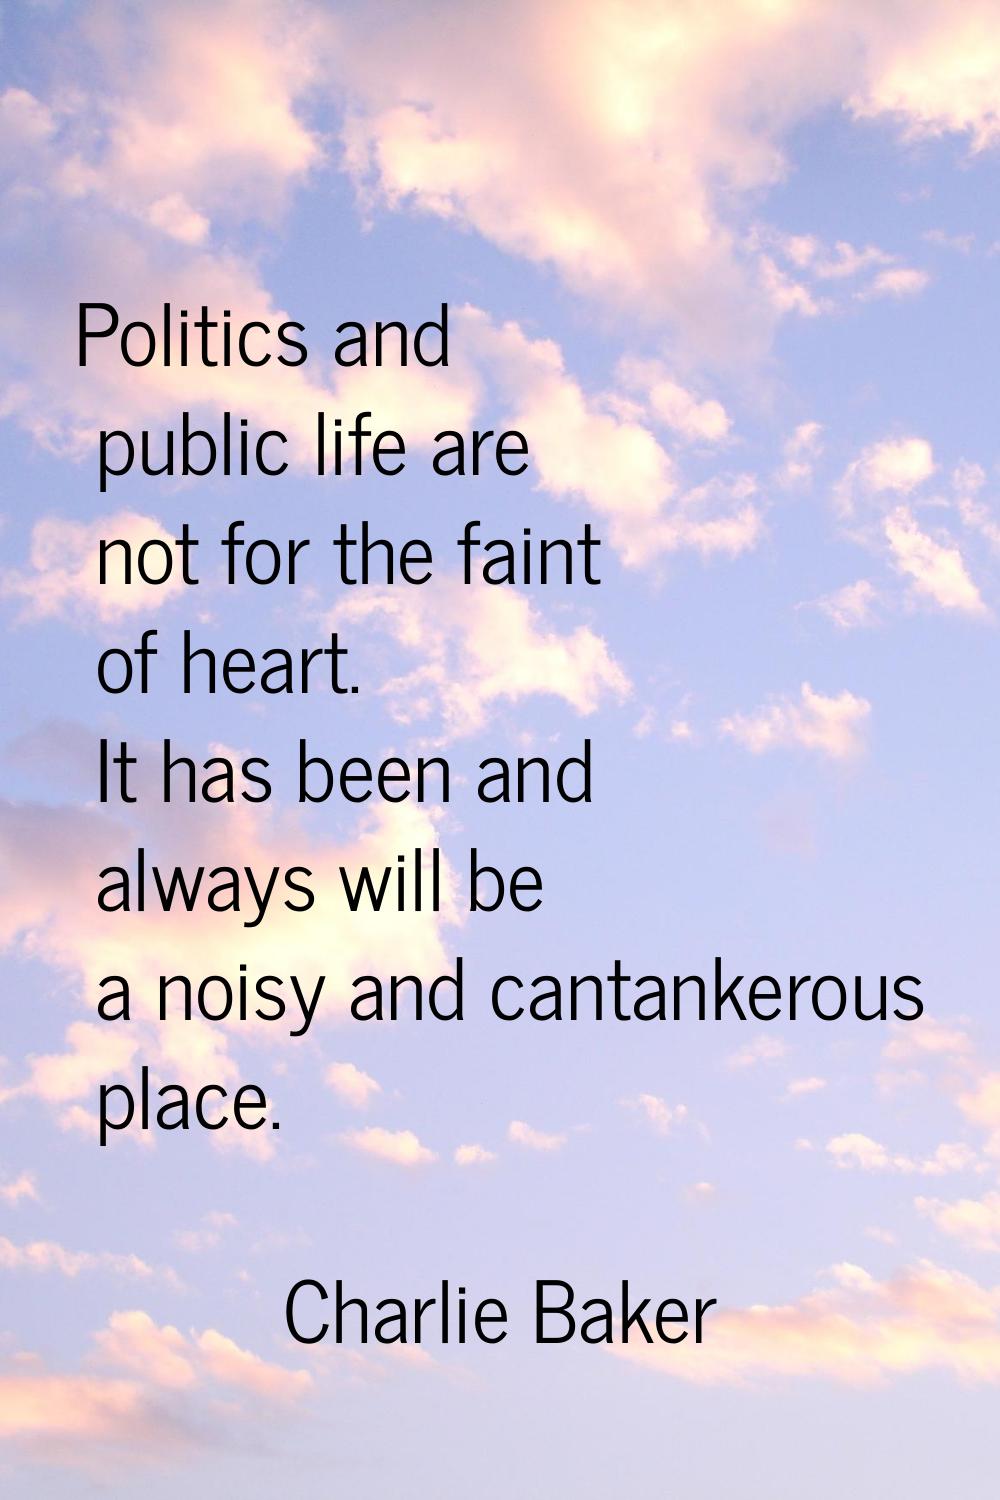 Politics and public life are not for the faint of heart. It has been and always will be a noisy and